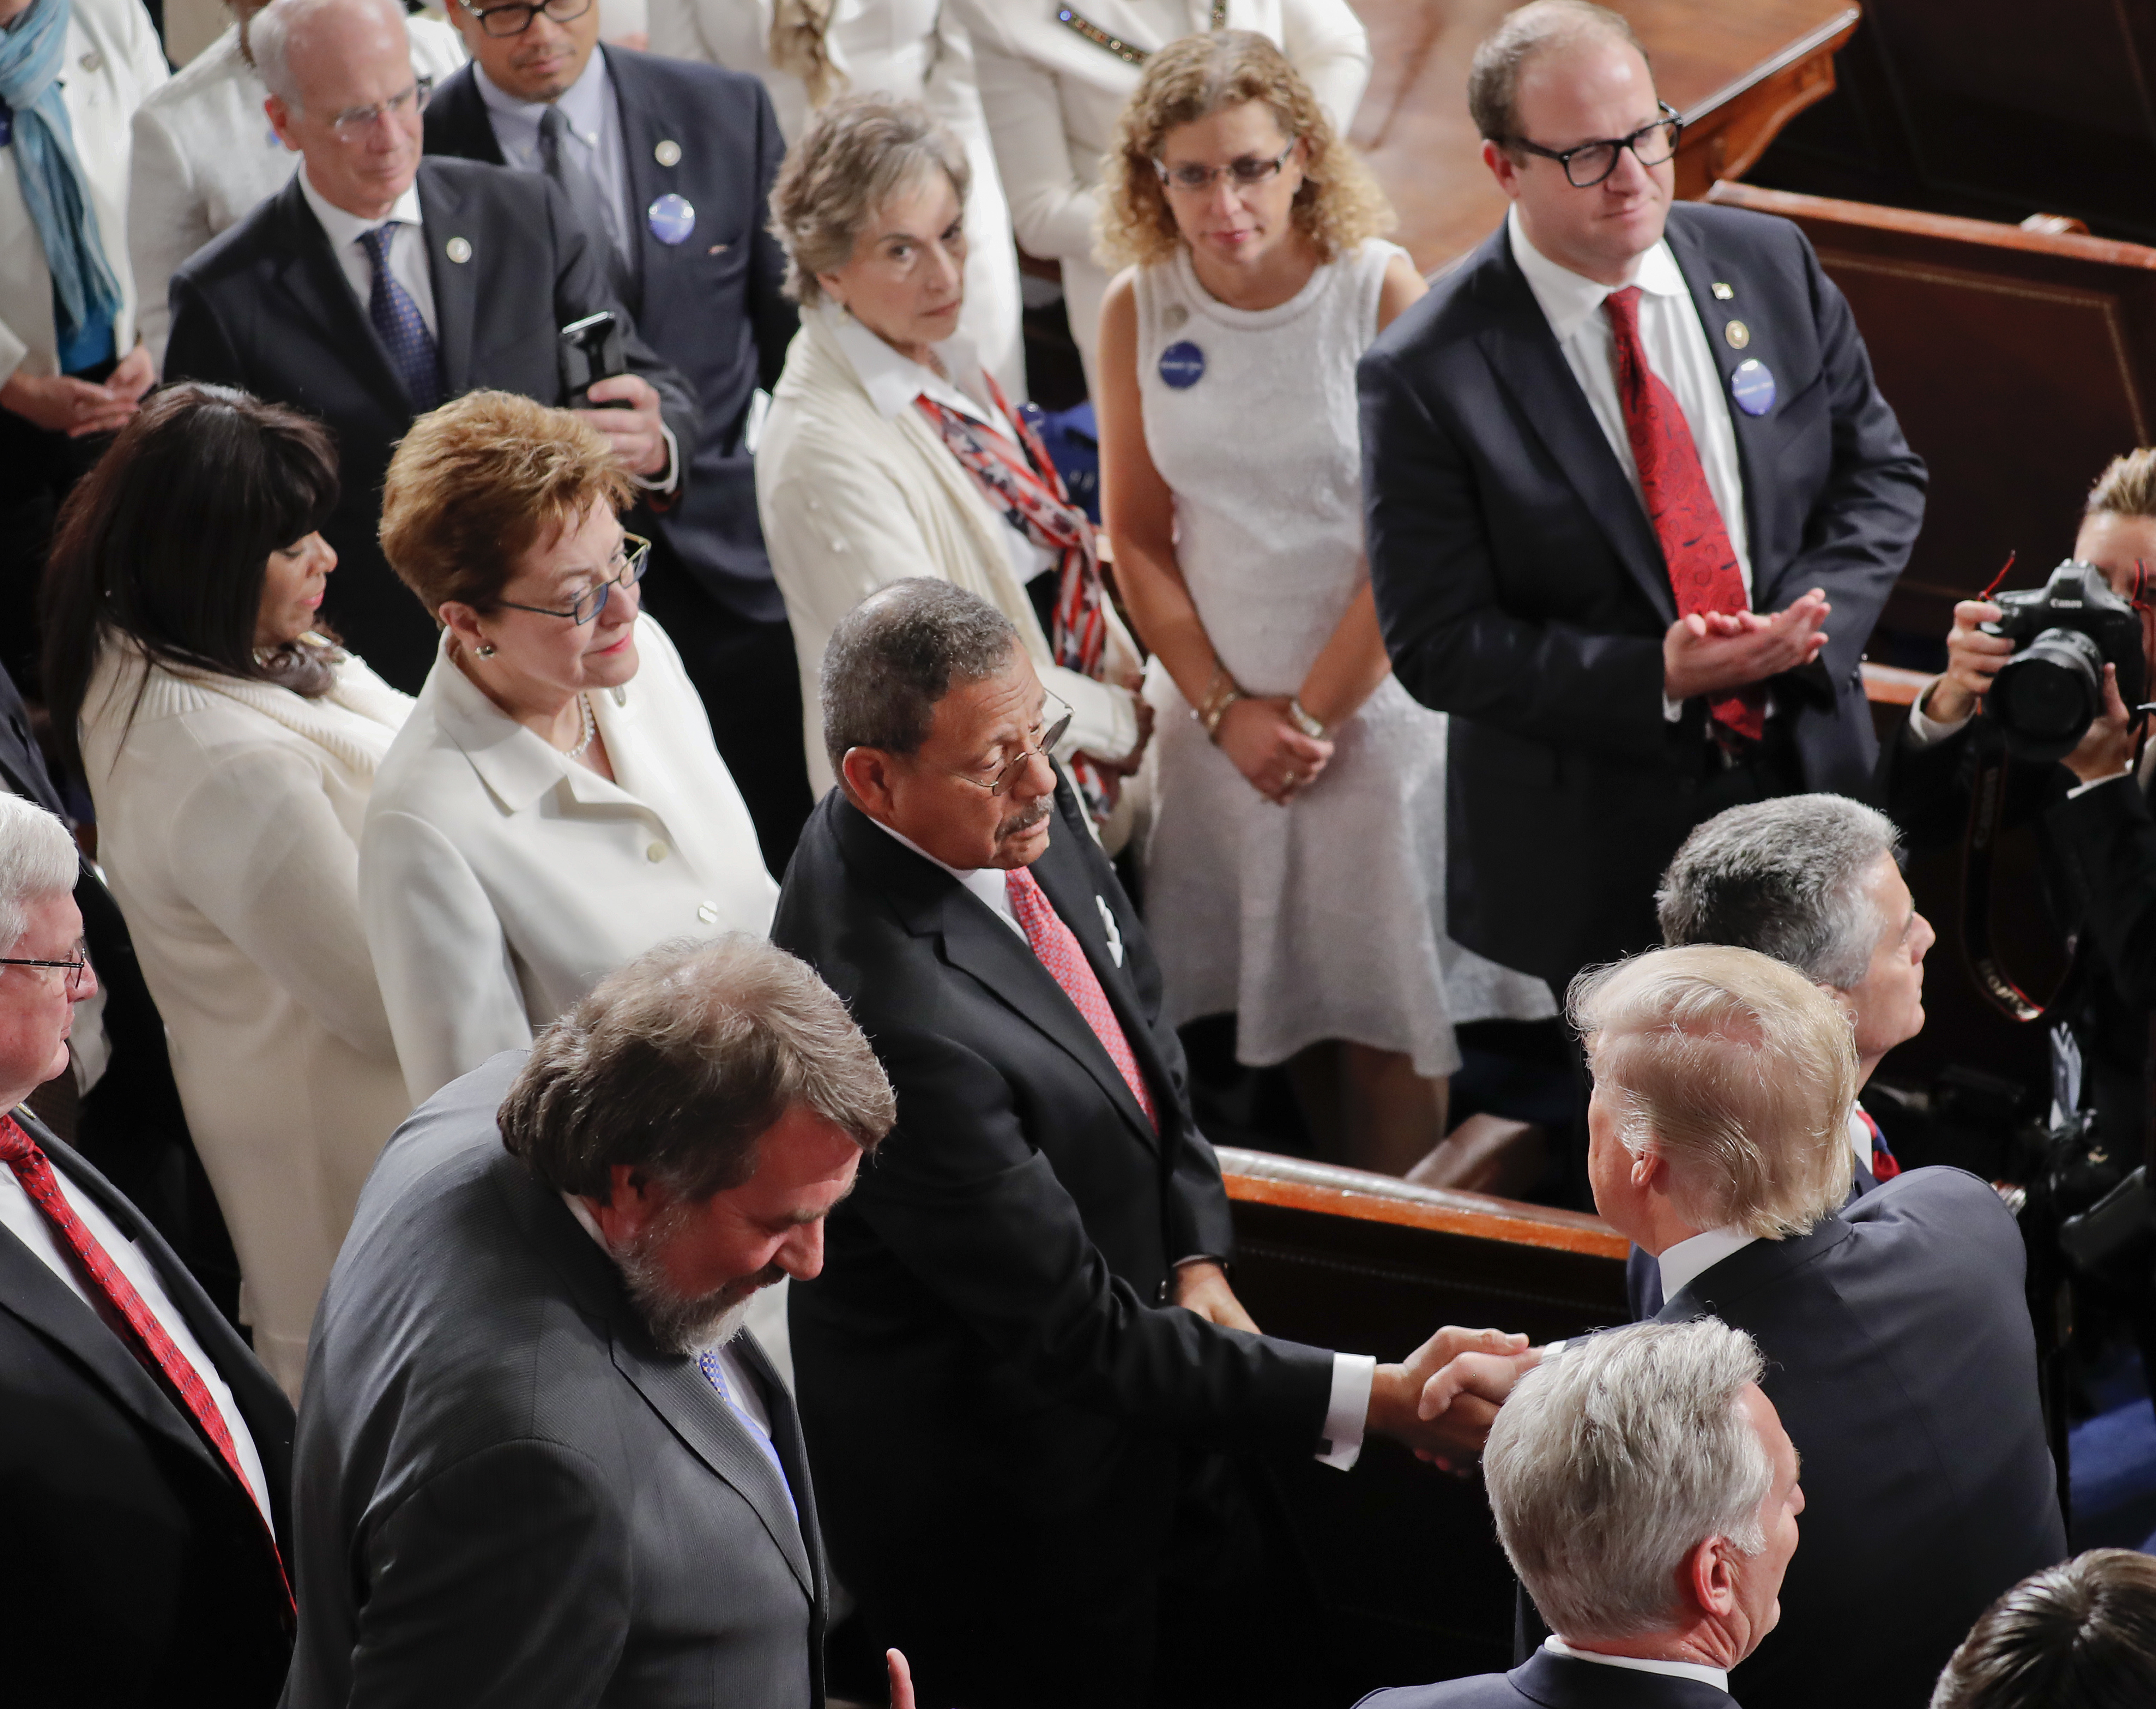 President Donald Trump, lower right, shakes hands with Rep. Sanford Bishop, D-Ga., center, as women Democratic members of Congress, wearing white, watch as Trump arrives on Capitol Hill in Washington, Tuesday, Feb. 28, 2017, to address a joint session of Congress. (AP Photo/Pablo Martinez Monsivais)